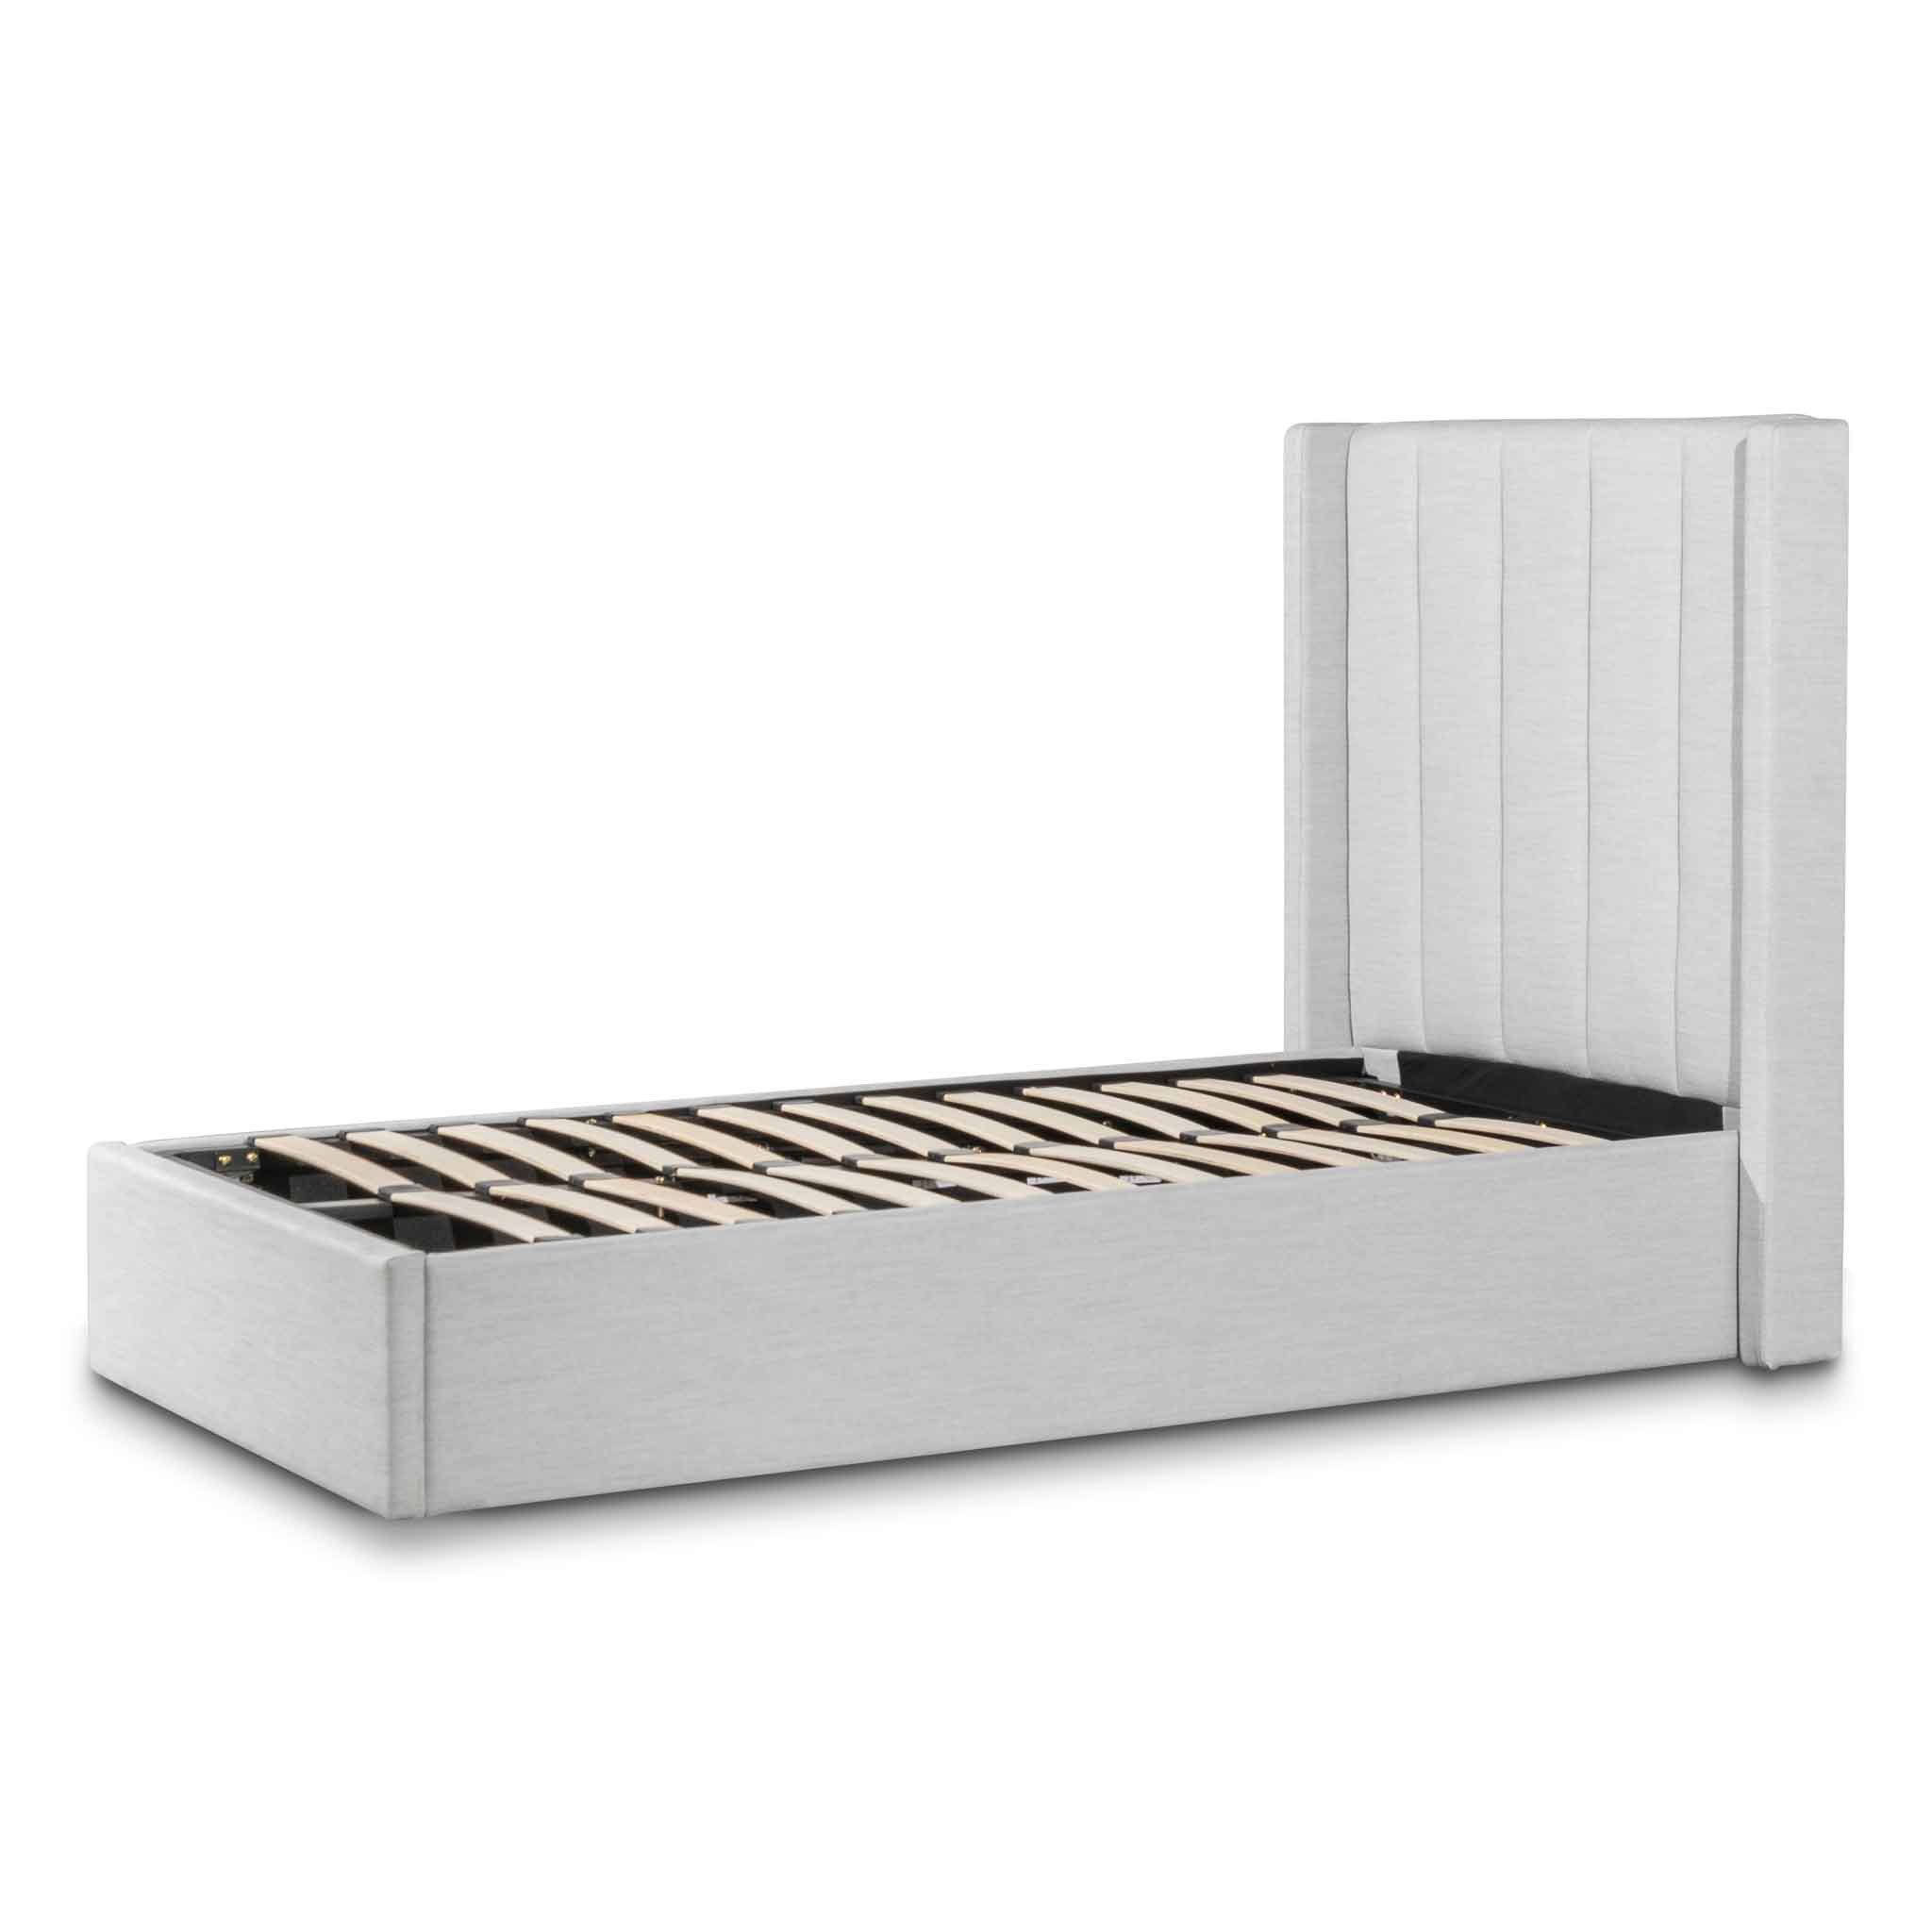 Vivienne Fabric Single Bed Frame - Fossil Grey - Beds